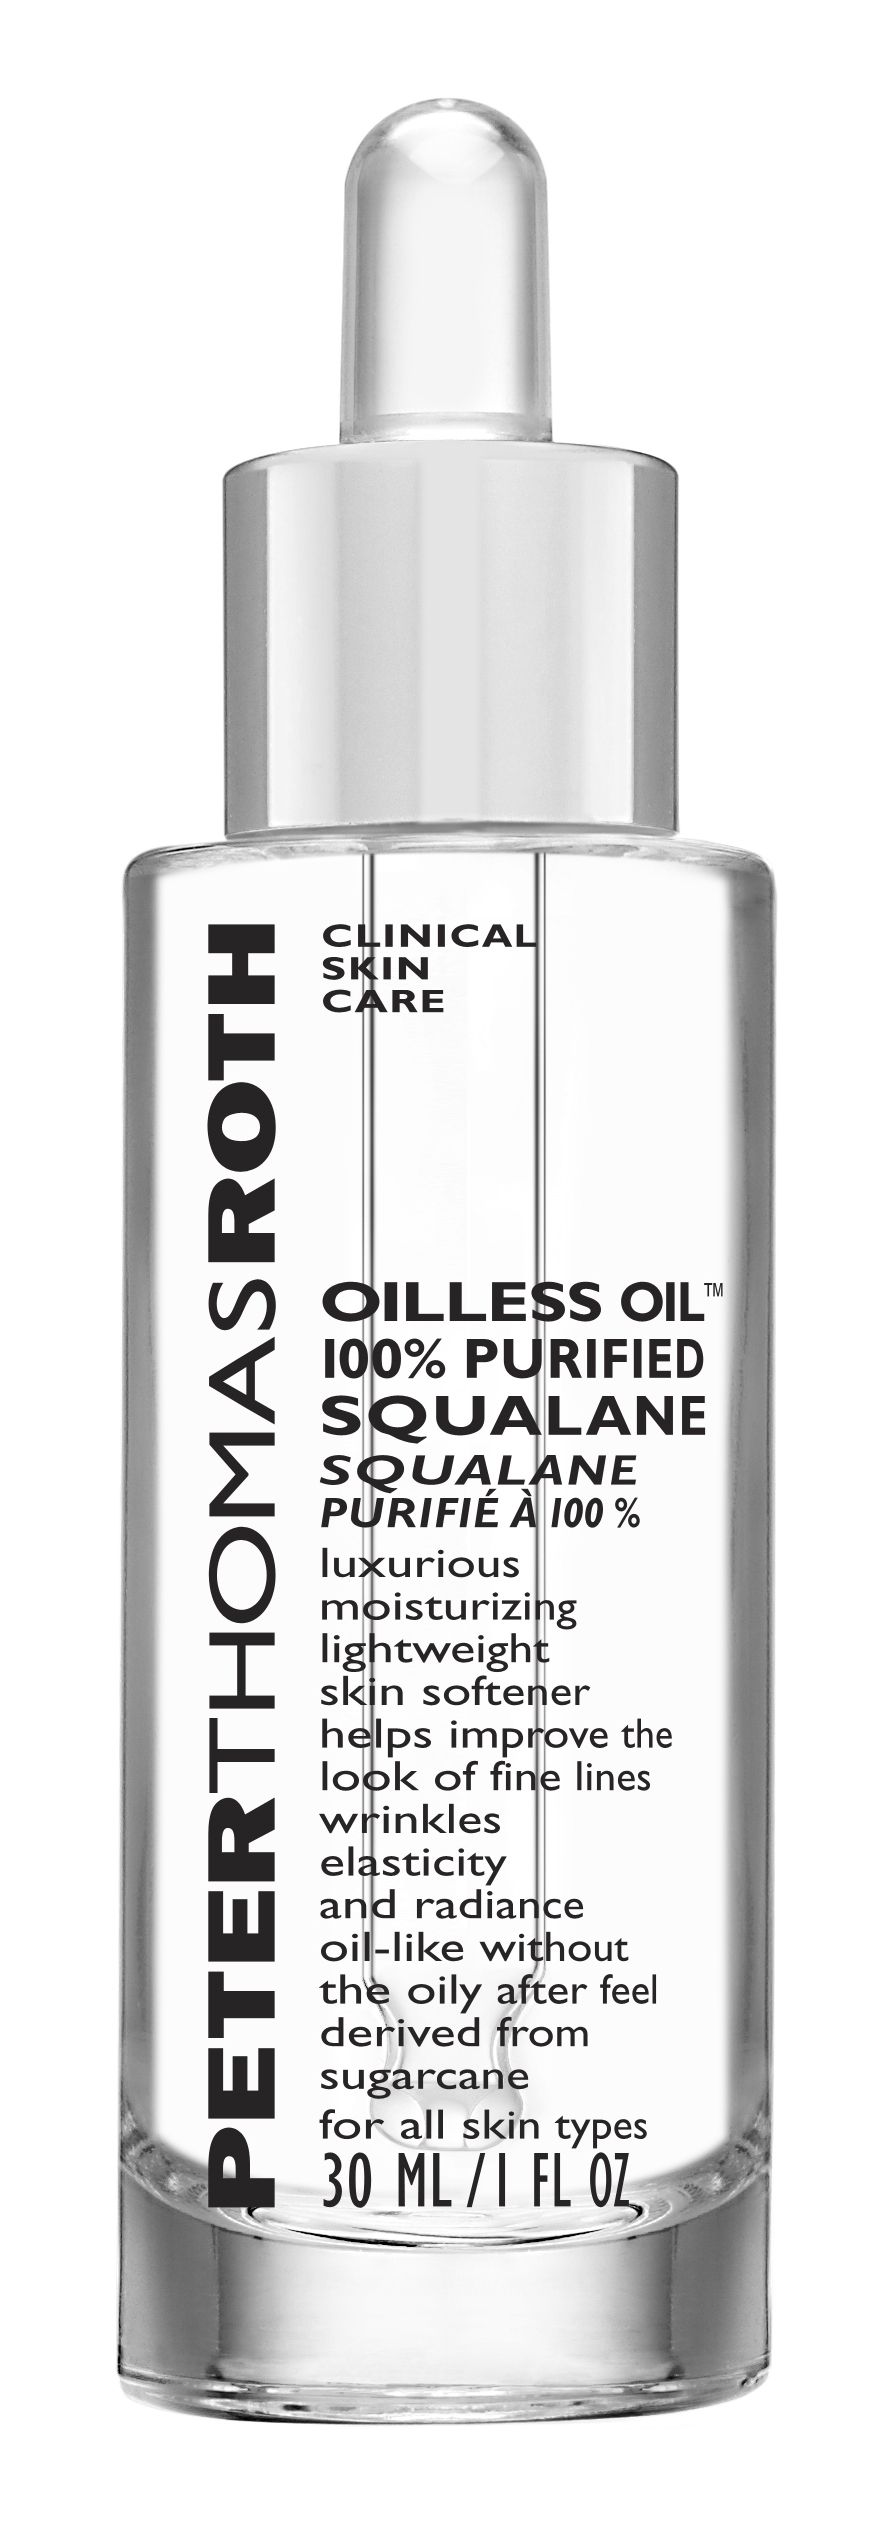 Billede af Peter Thomas Roth Oilless Oil 100% Purified Squalane 30 ml.